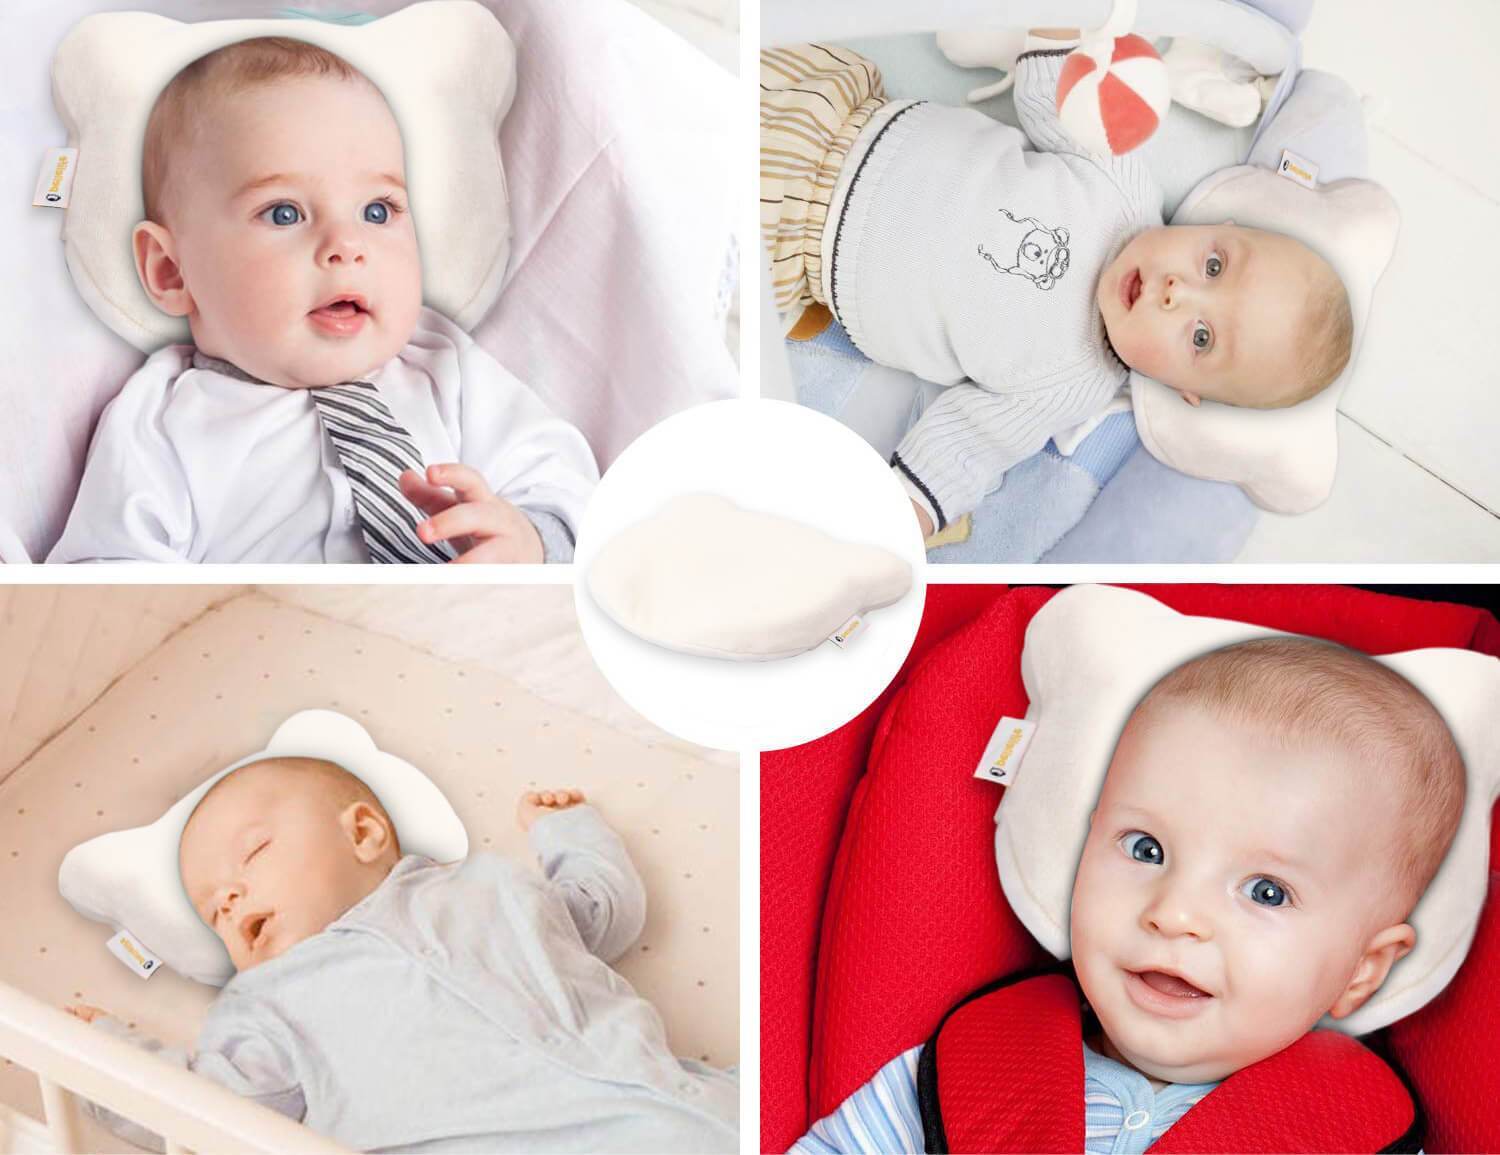 Baby Pillow against Head Shaping Breathable Velvet Fabric Memory Form Pillow for Infant-Whilte